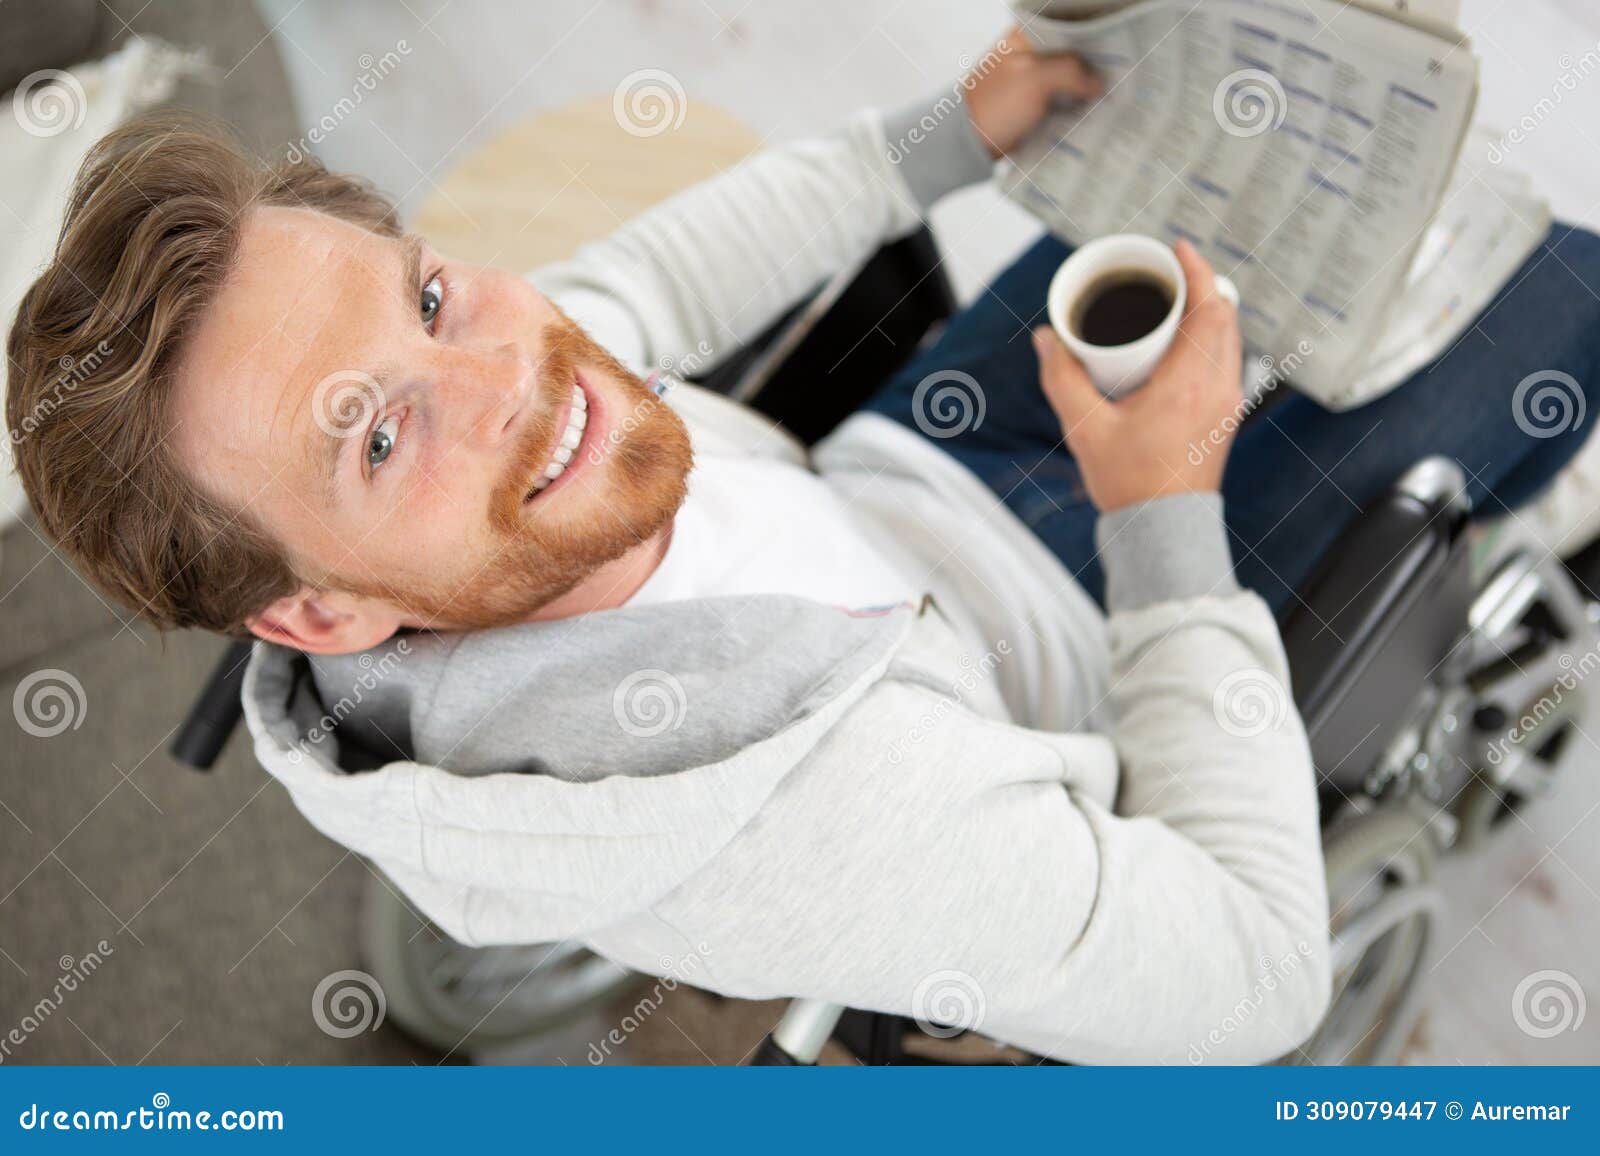 disabled man in wheelchair holding coffee and newspaper